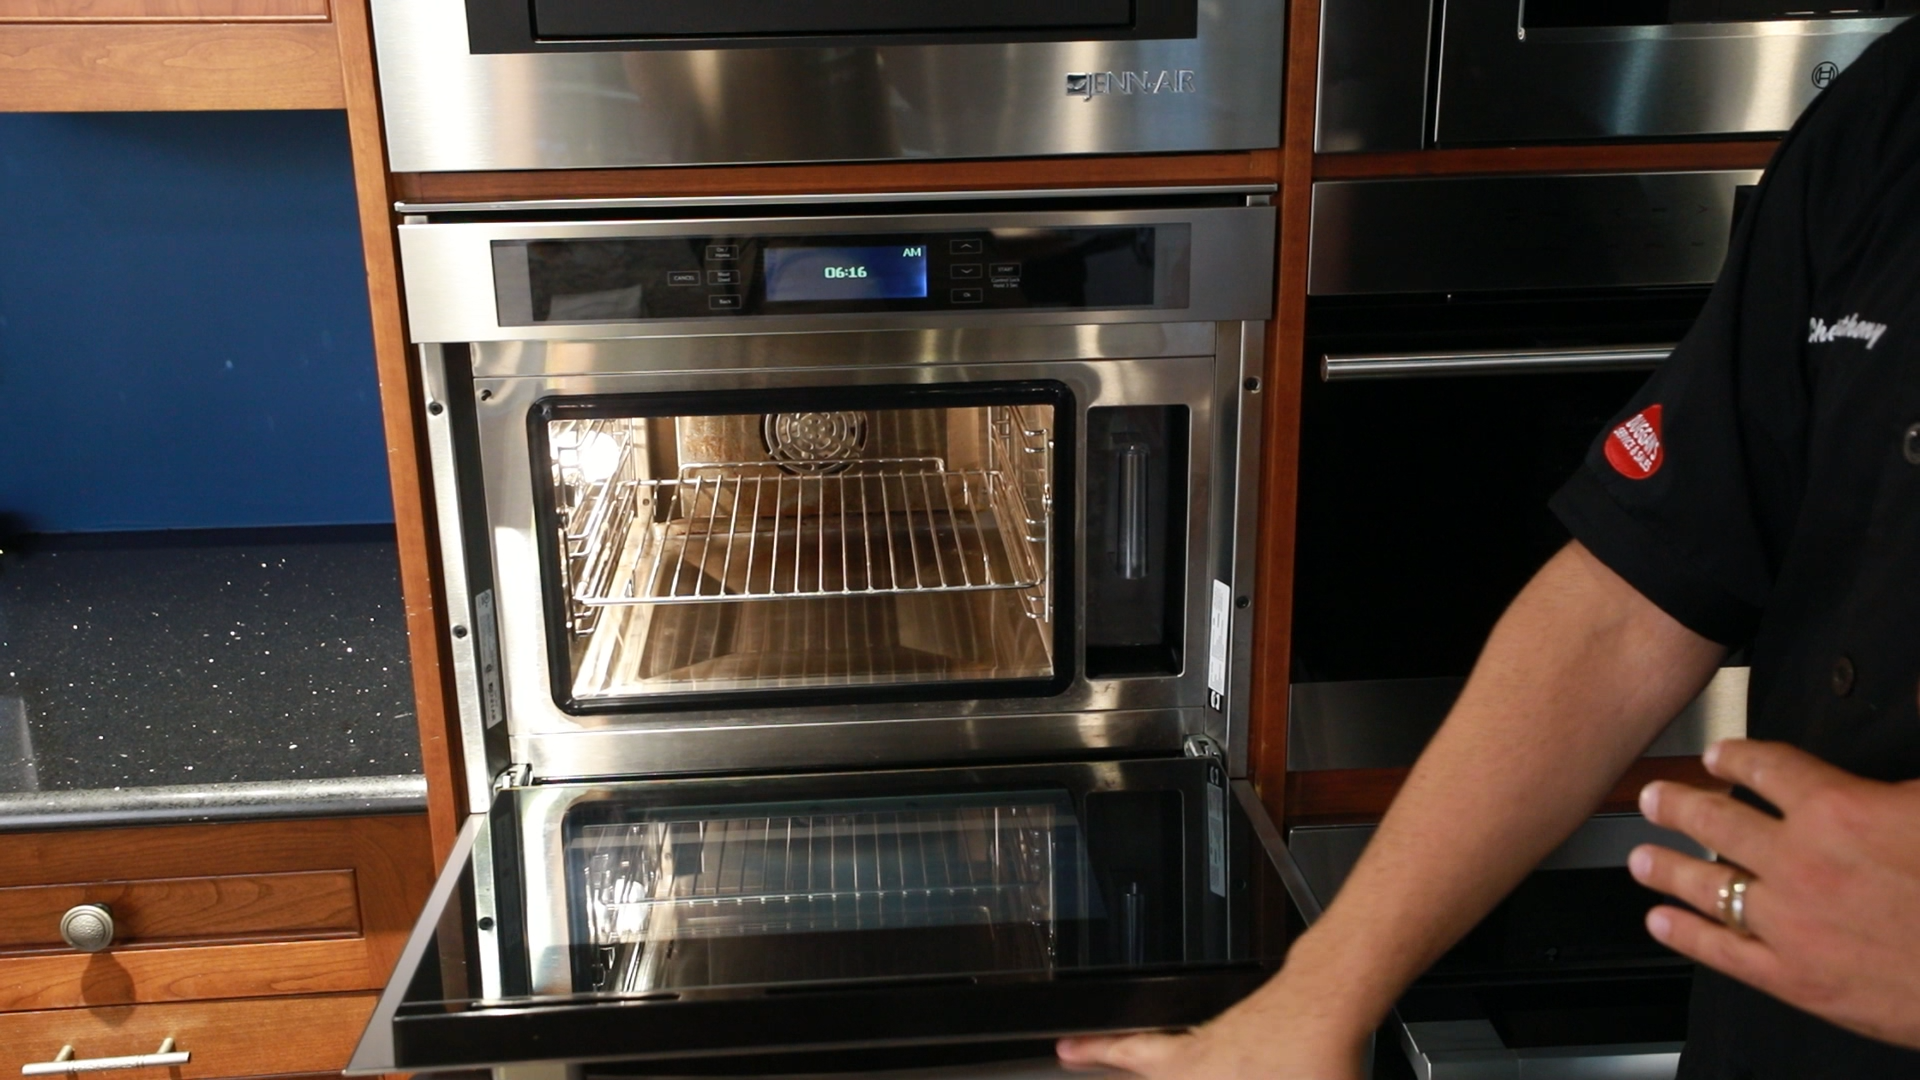 How To Clean A Steam Oven - Steam & Bake